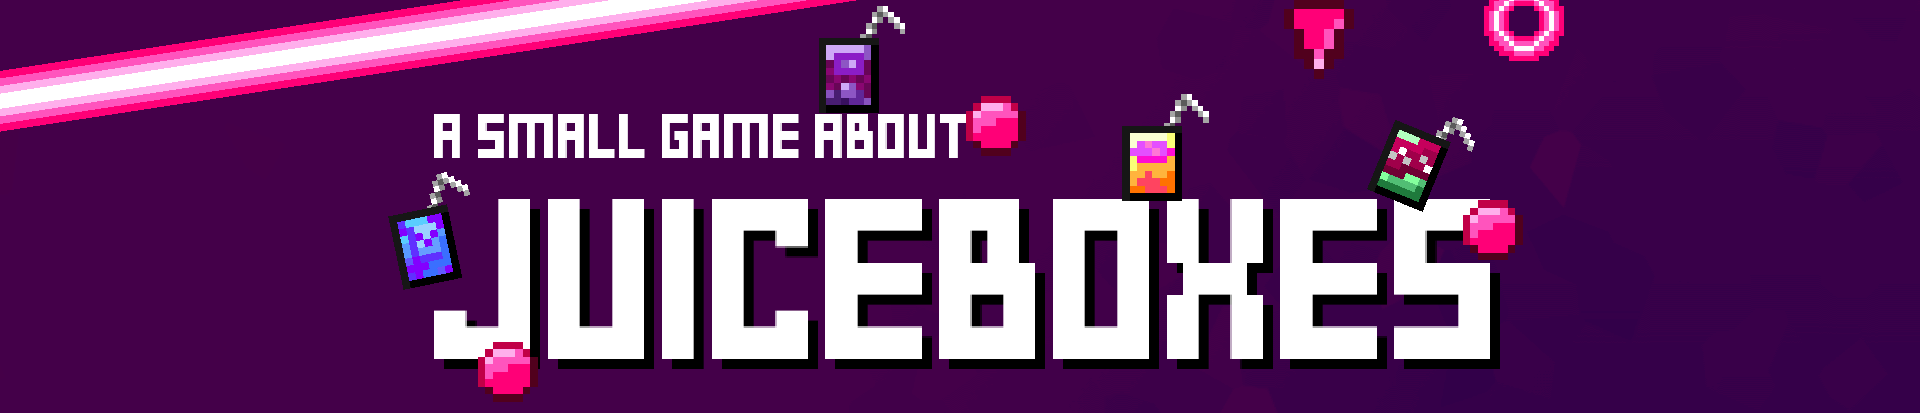 A Small Game About Juiceboxes